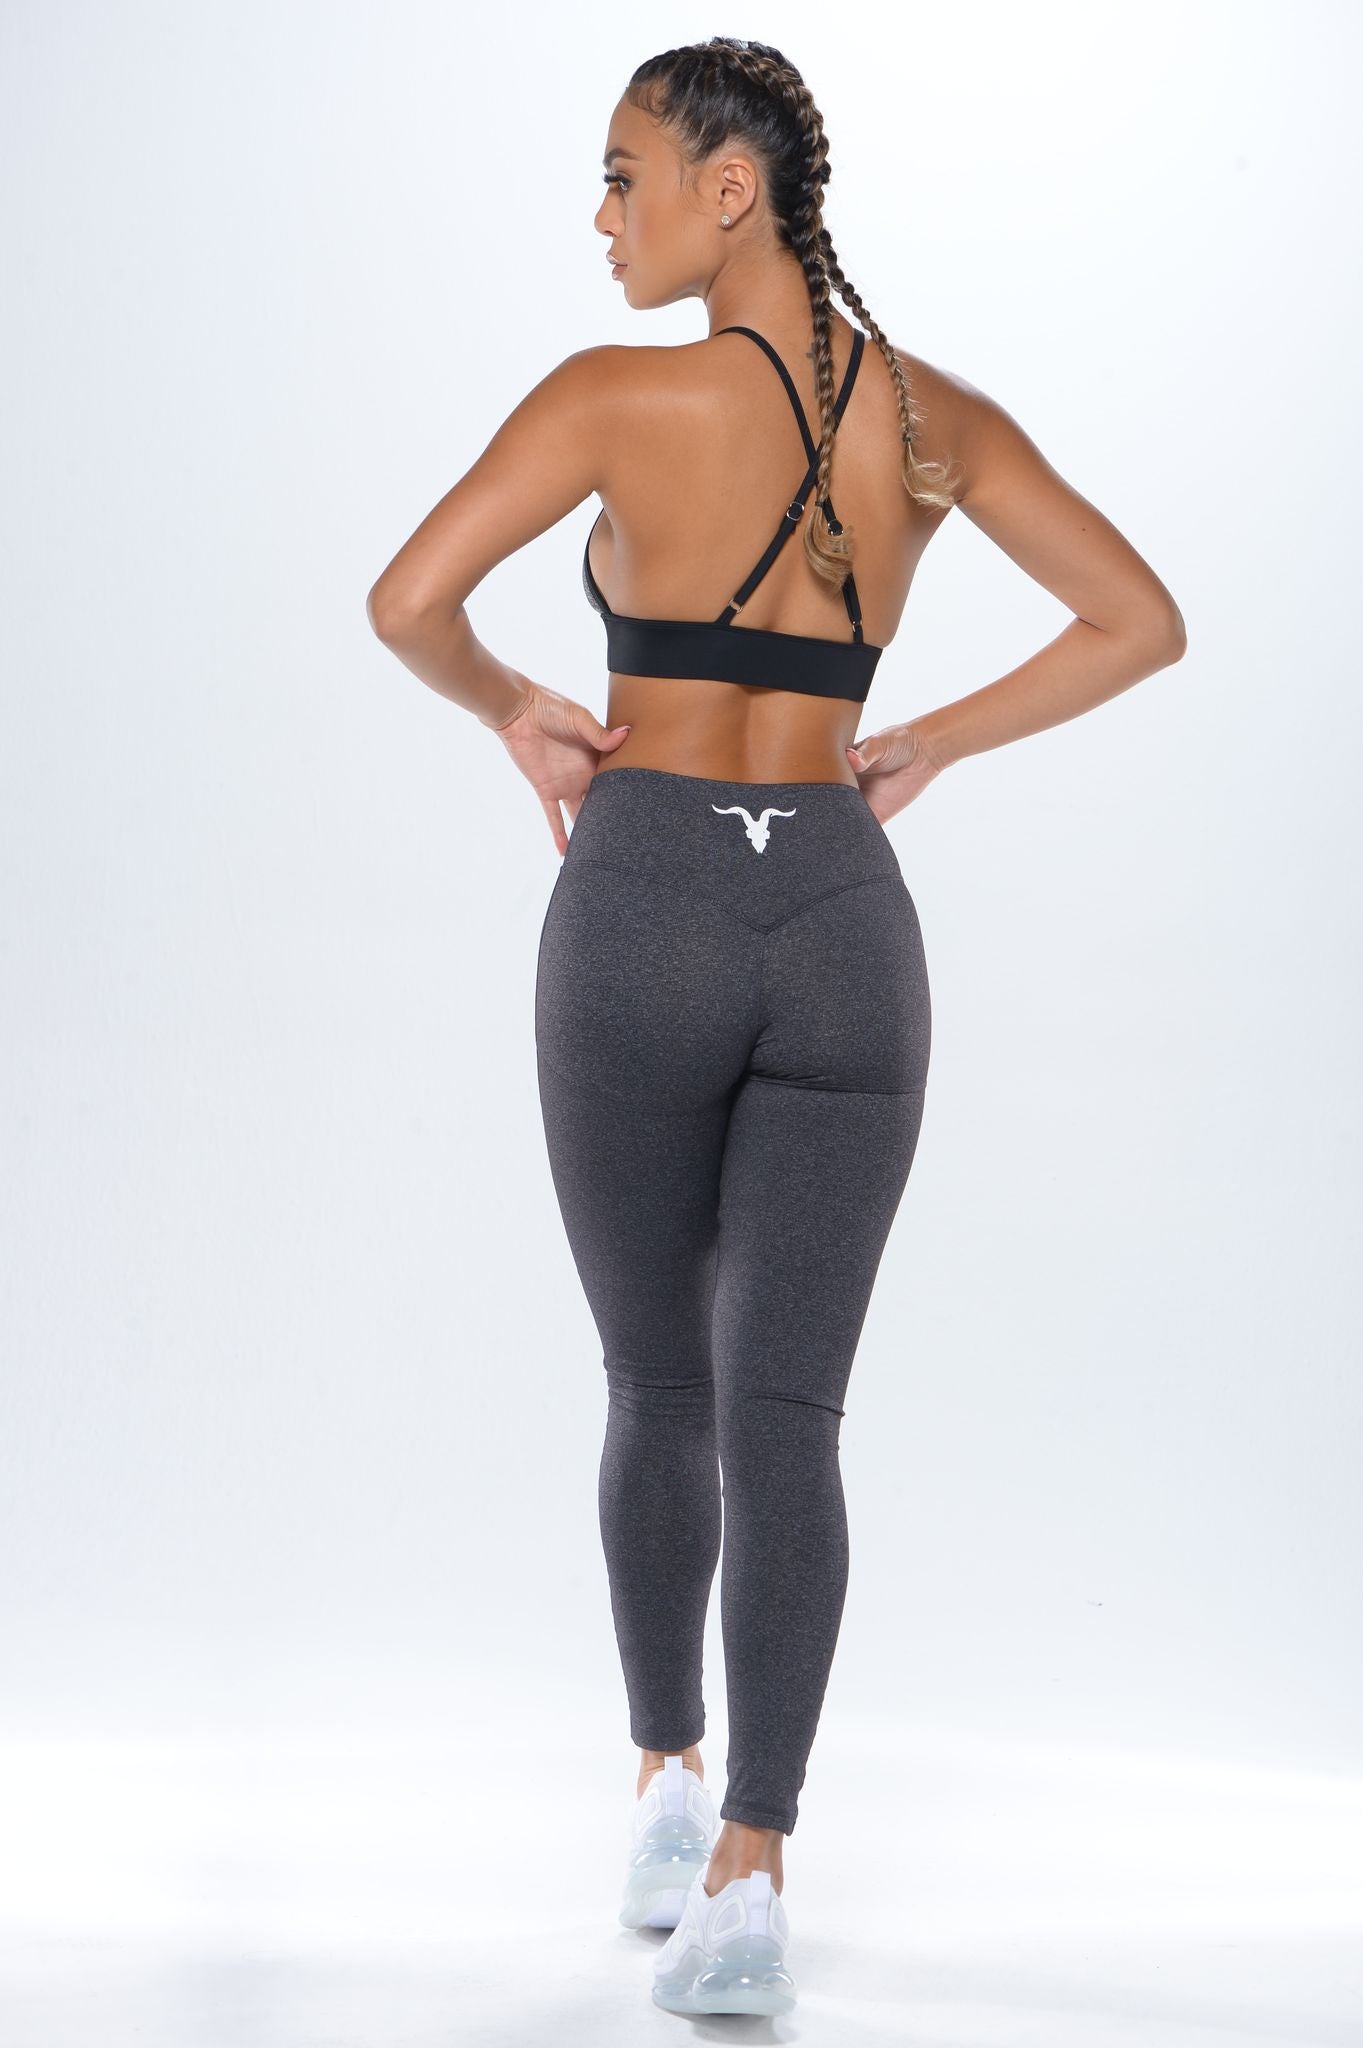 SEED SPORTS CHARCOAL GREY HEATHER LEGGINGS size S $35 free shipping | eBay